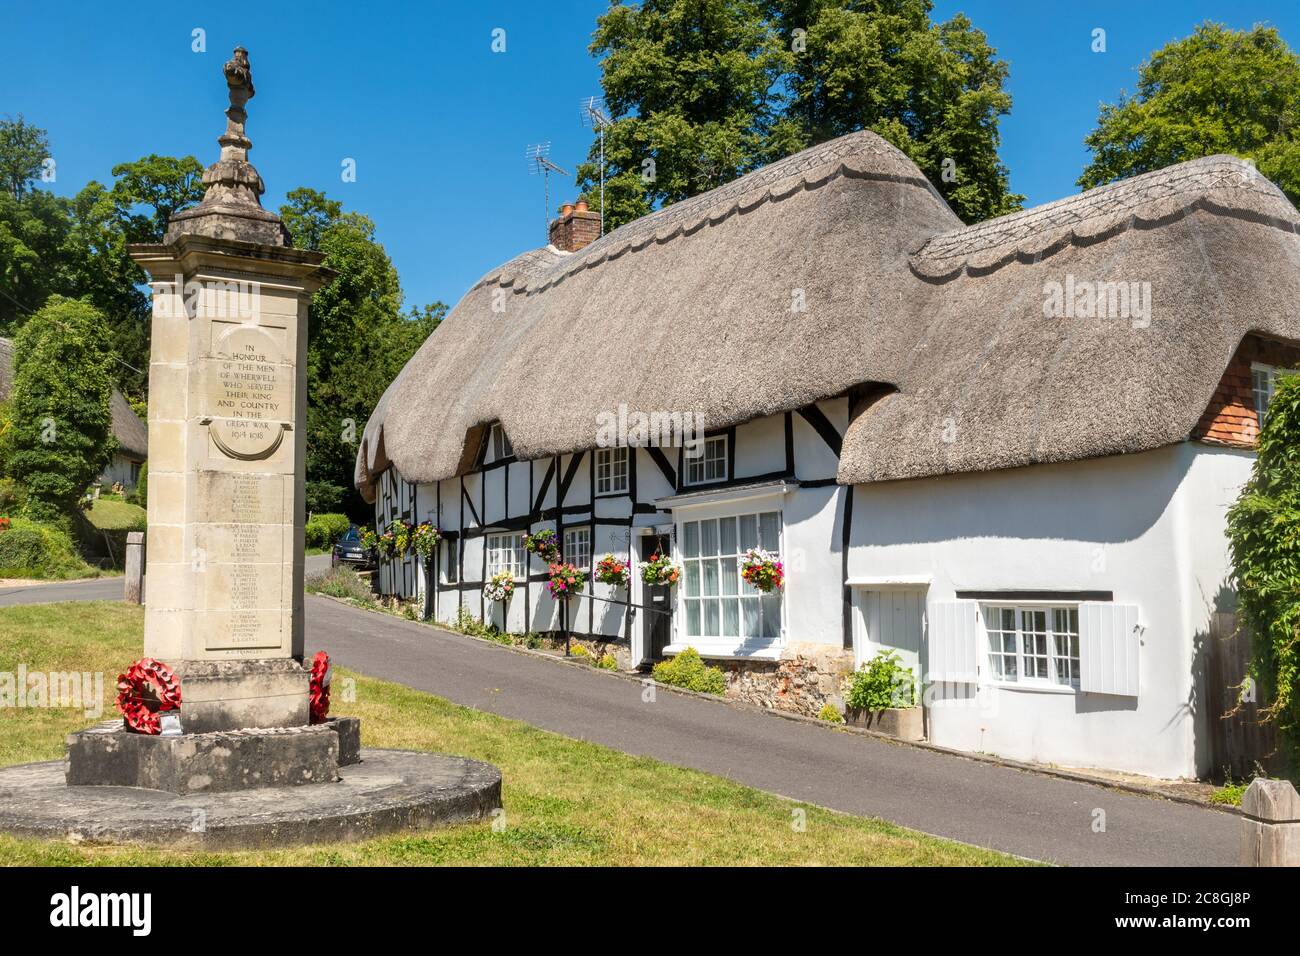 Pretty thatched cottages in the Hampshire village of Wherwell, England, UK, during summer Stock Photo